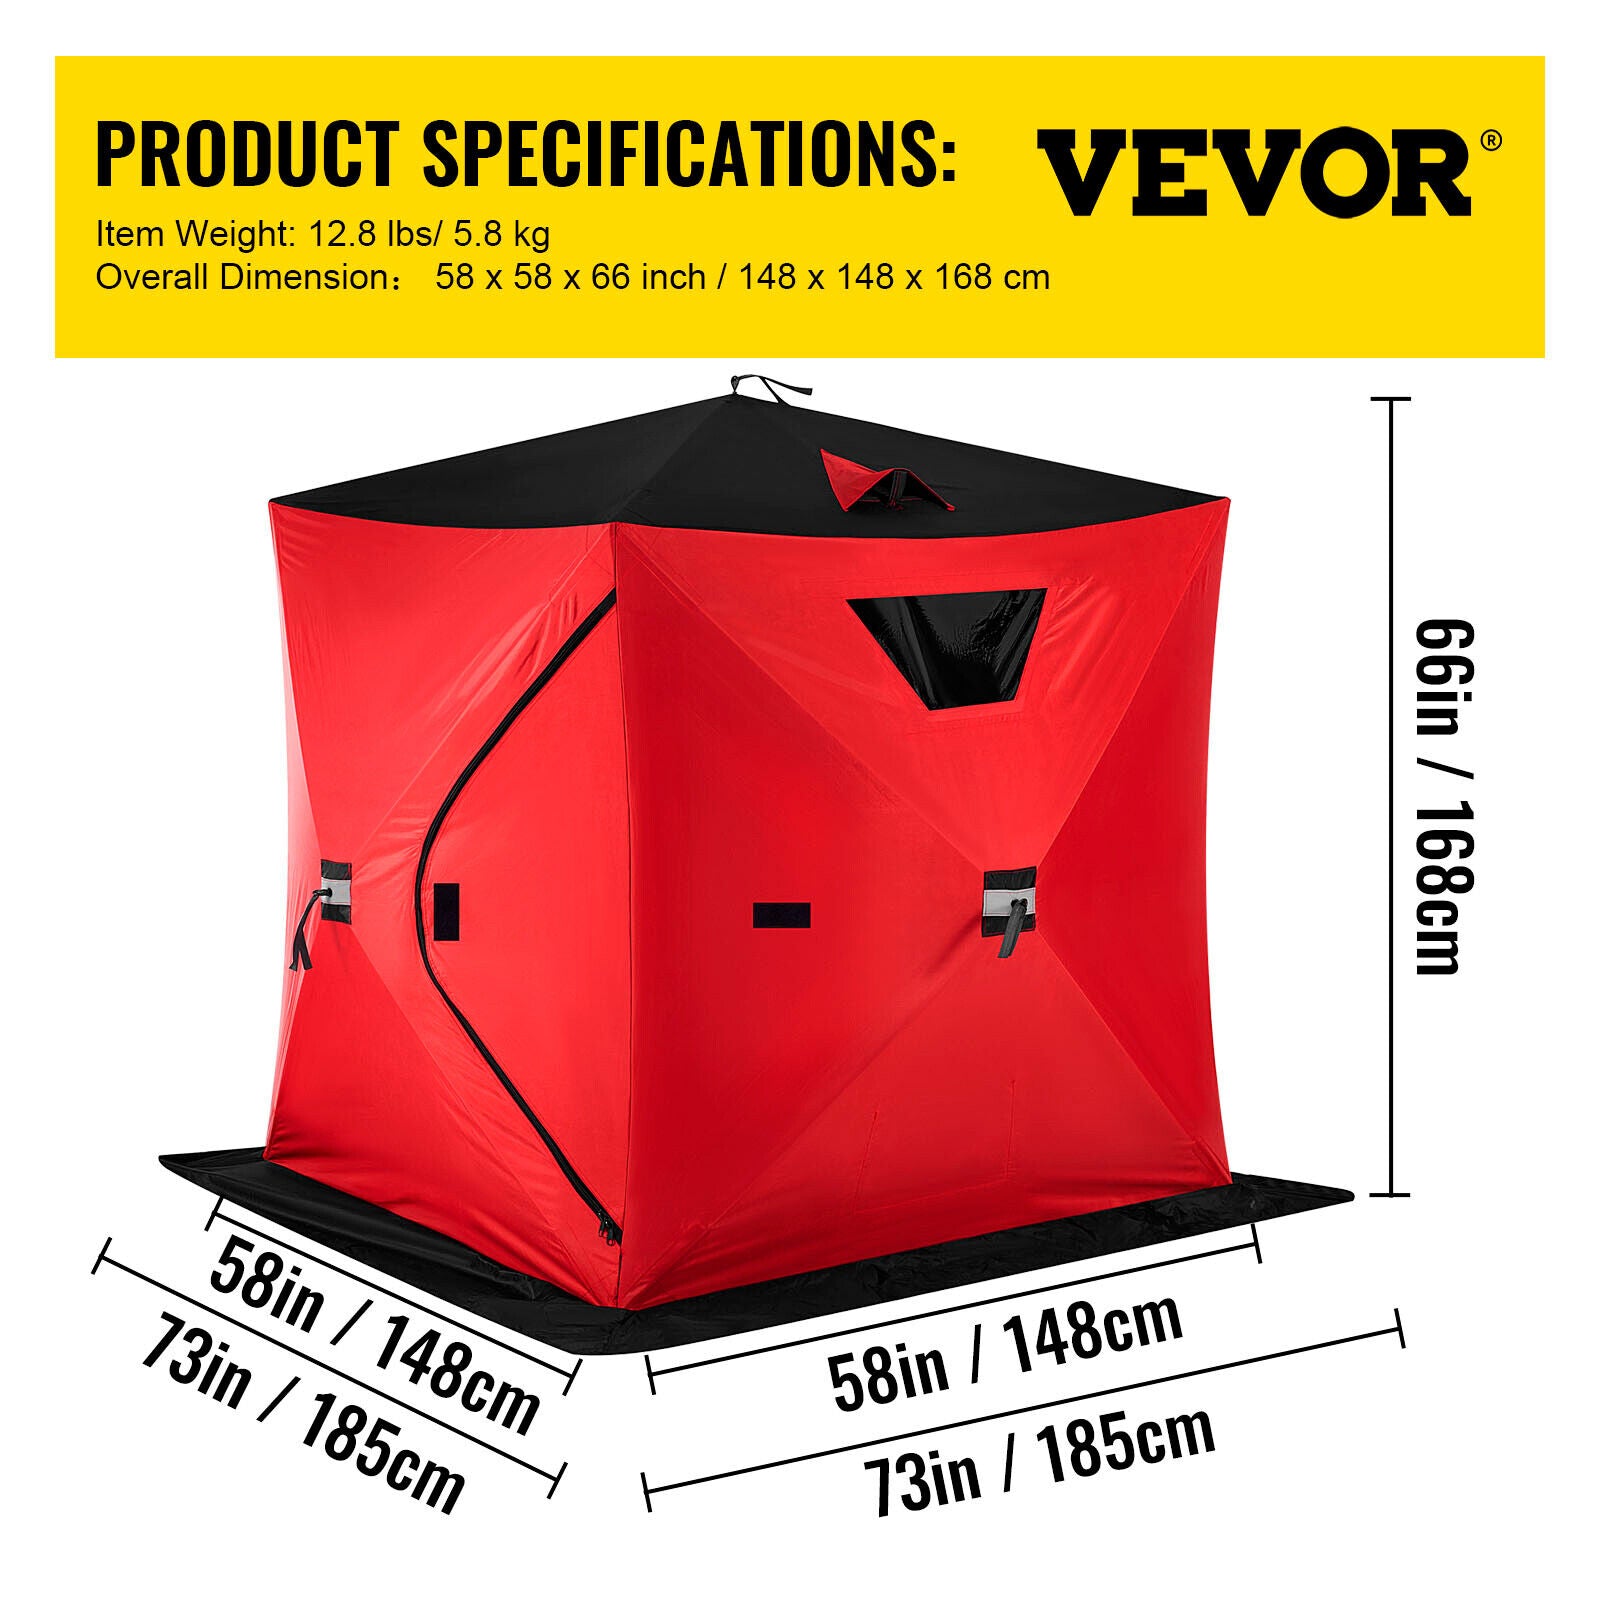 VEVOR Ice Fishing Tent Waterproof Pop-up 2-Person Carrying Bag Ice She